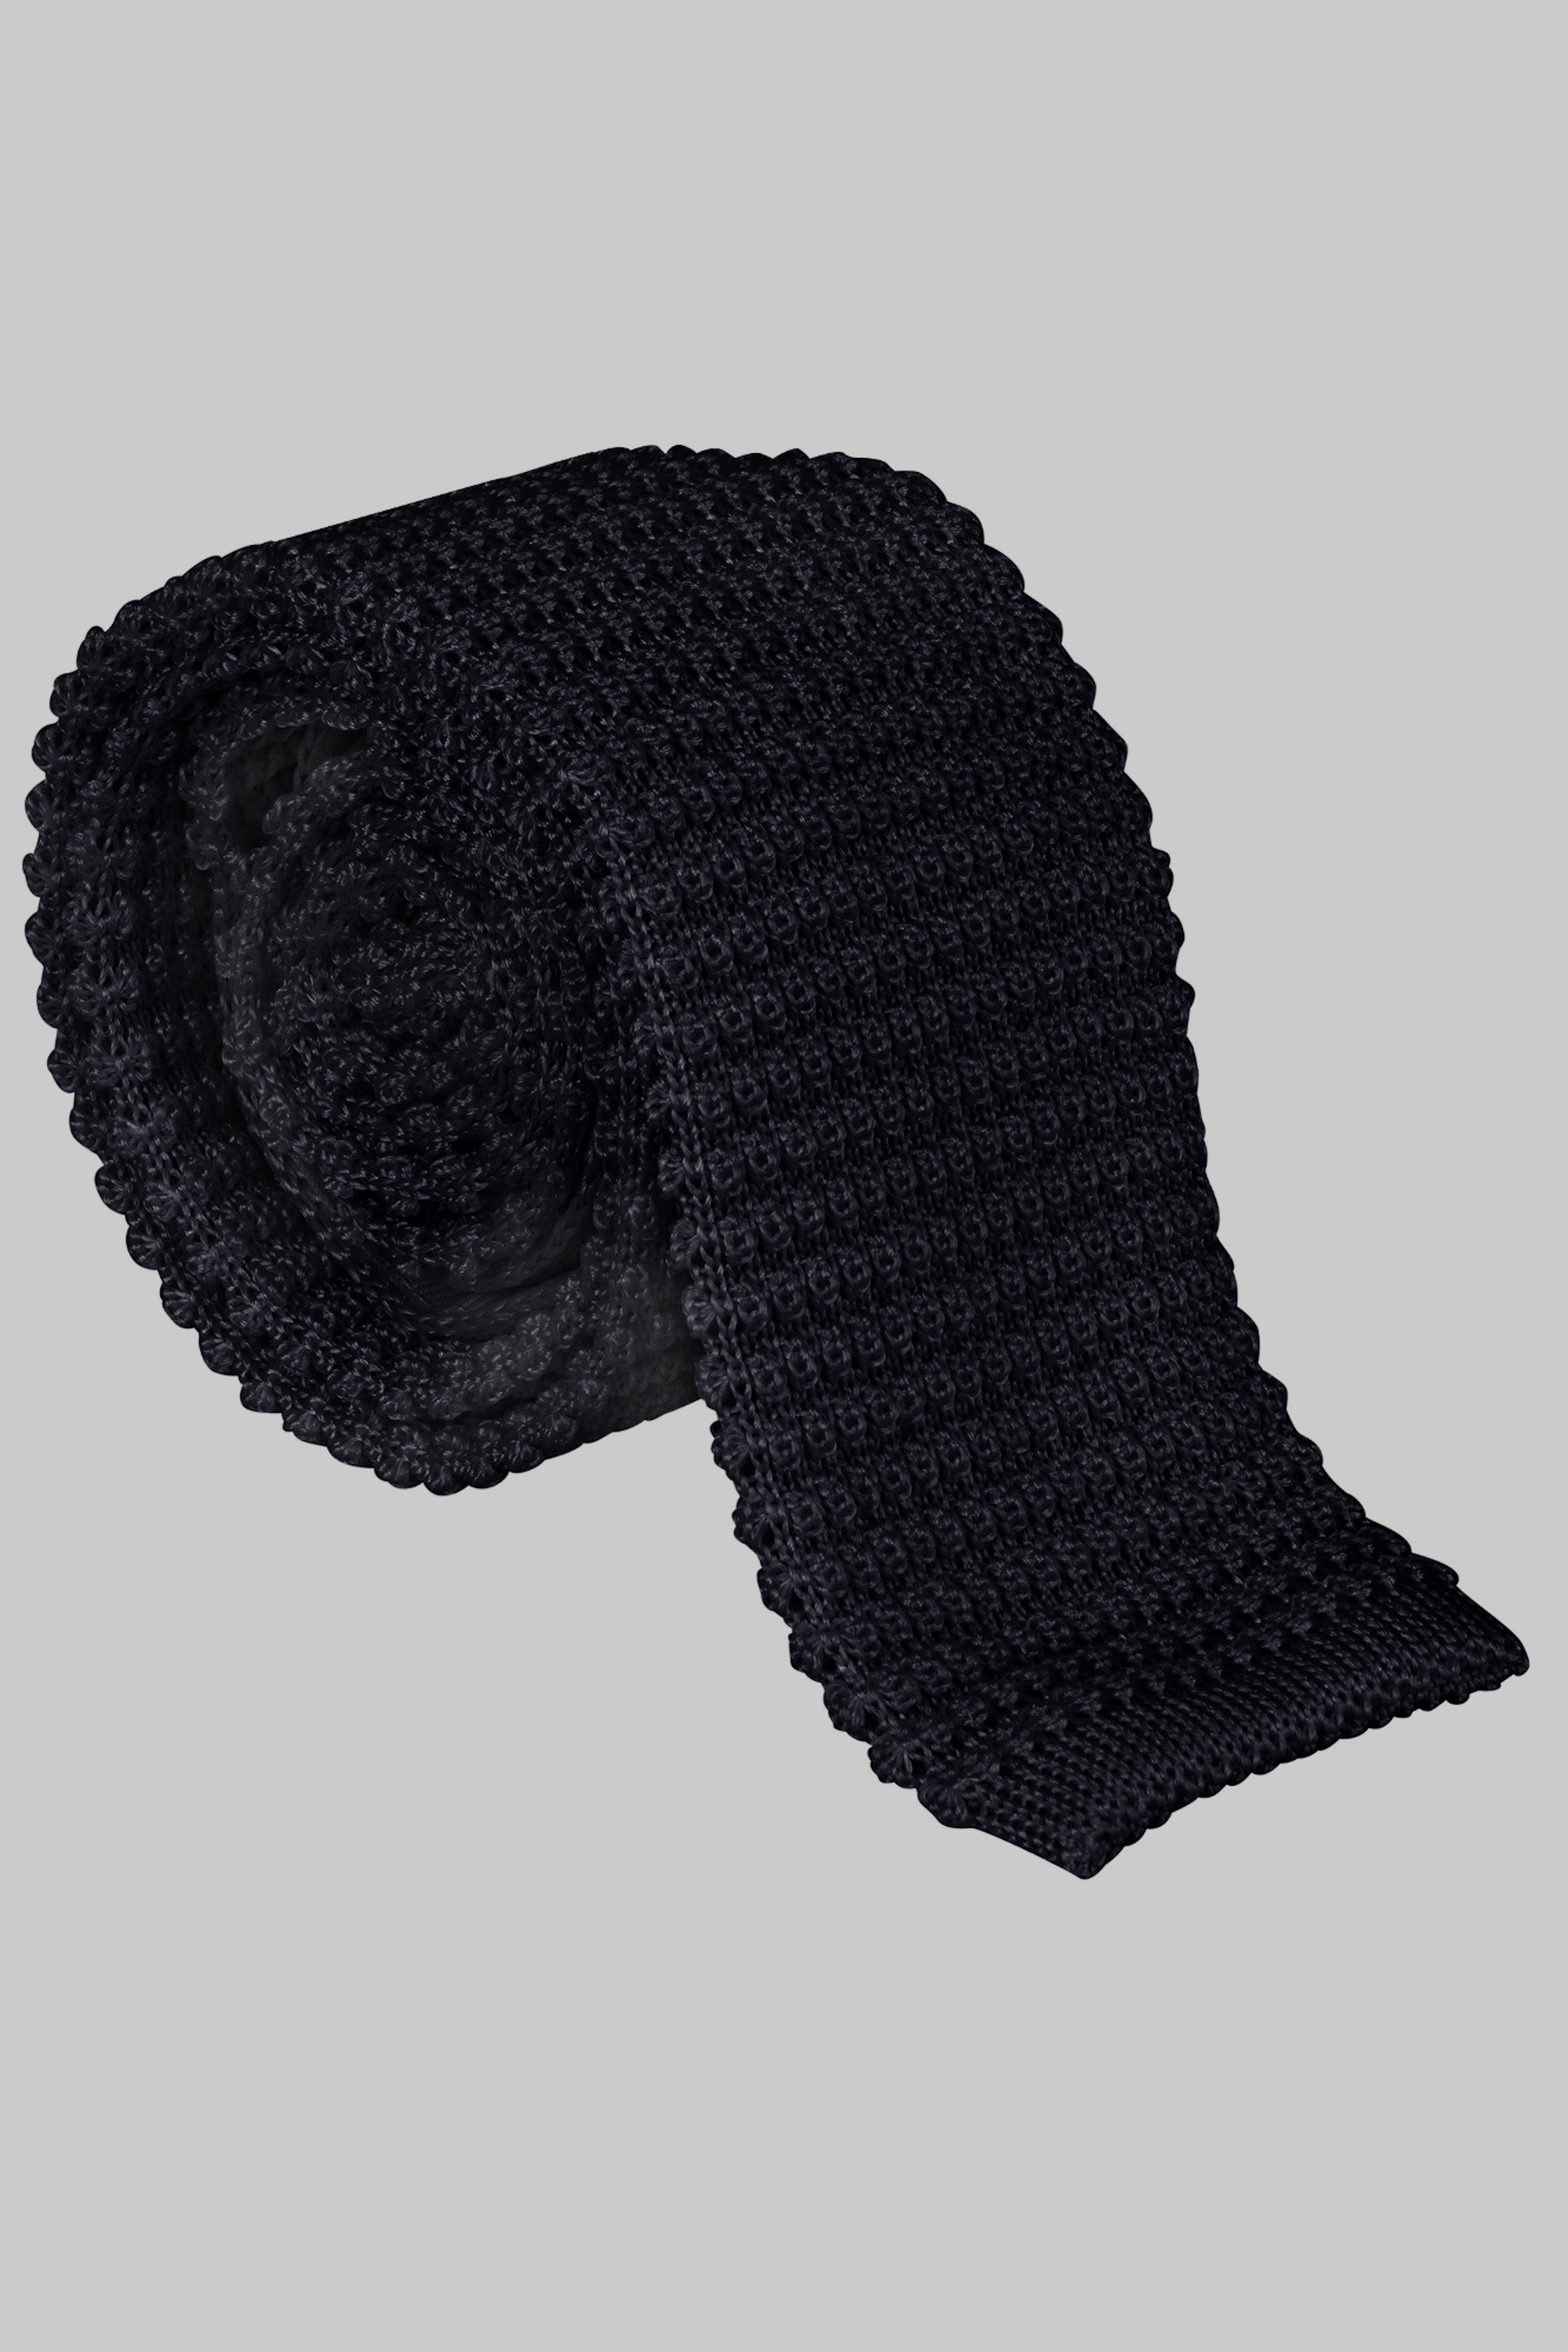 Image of Hudson Silk Knitted Tie in Navy-Jack Victor